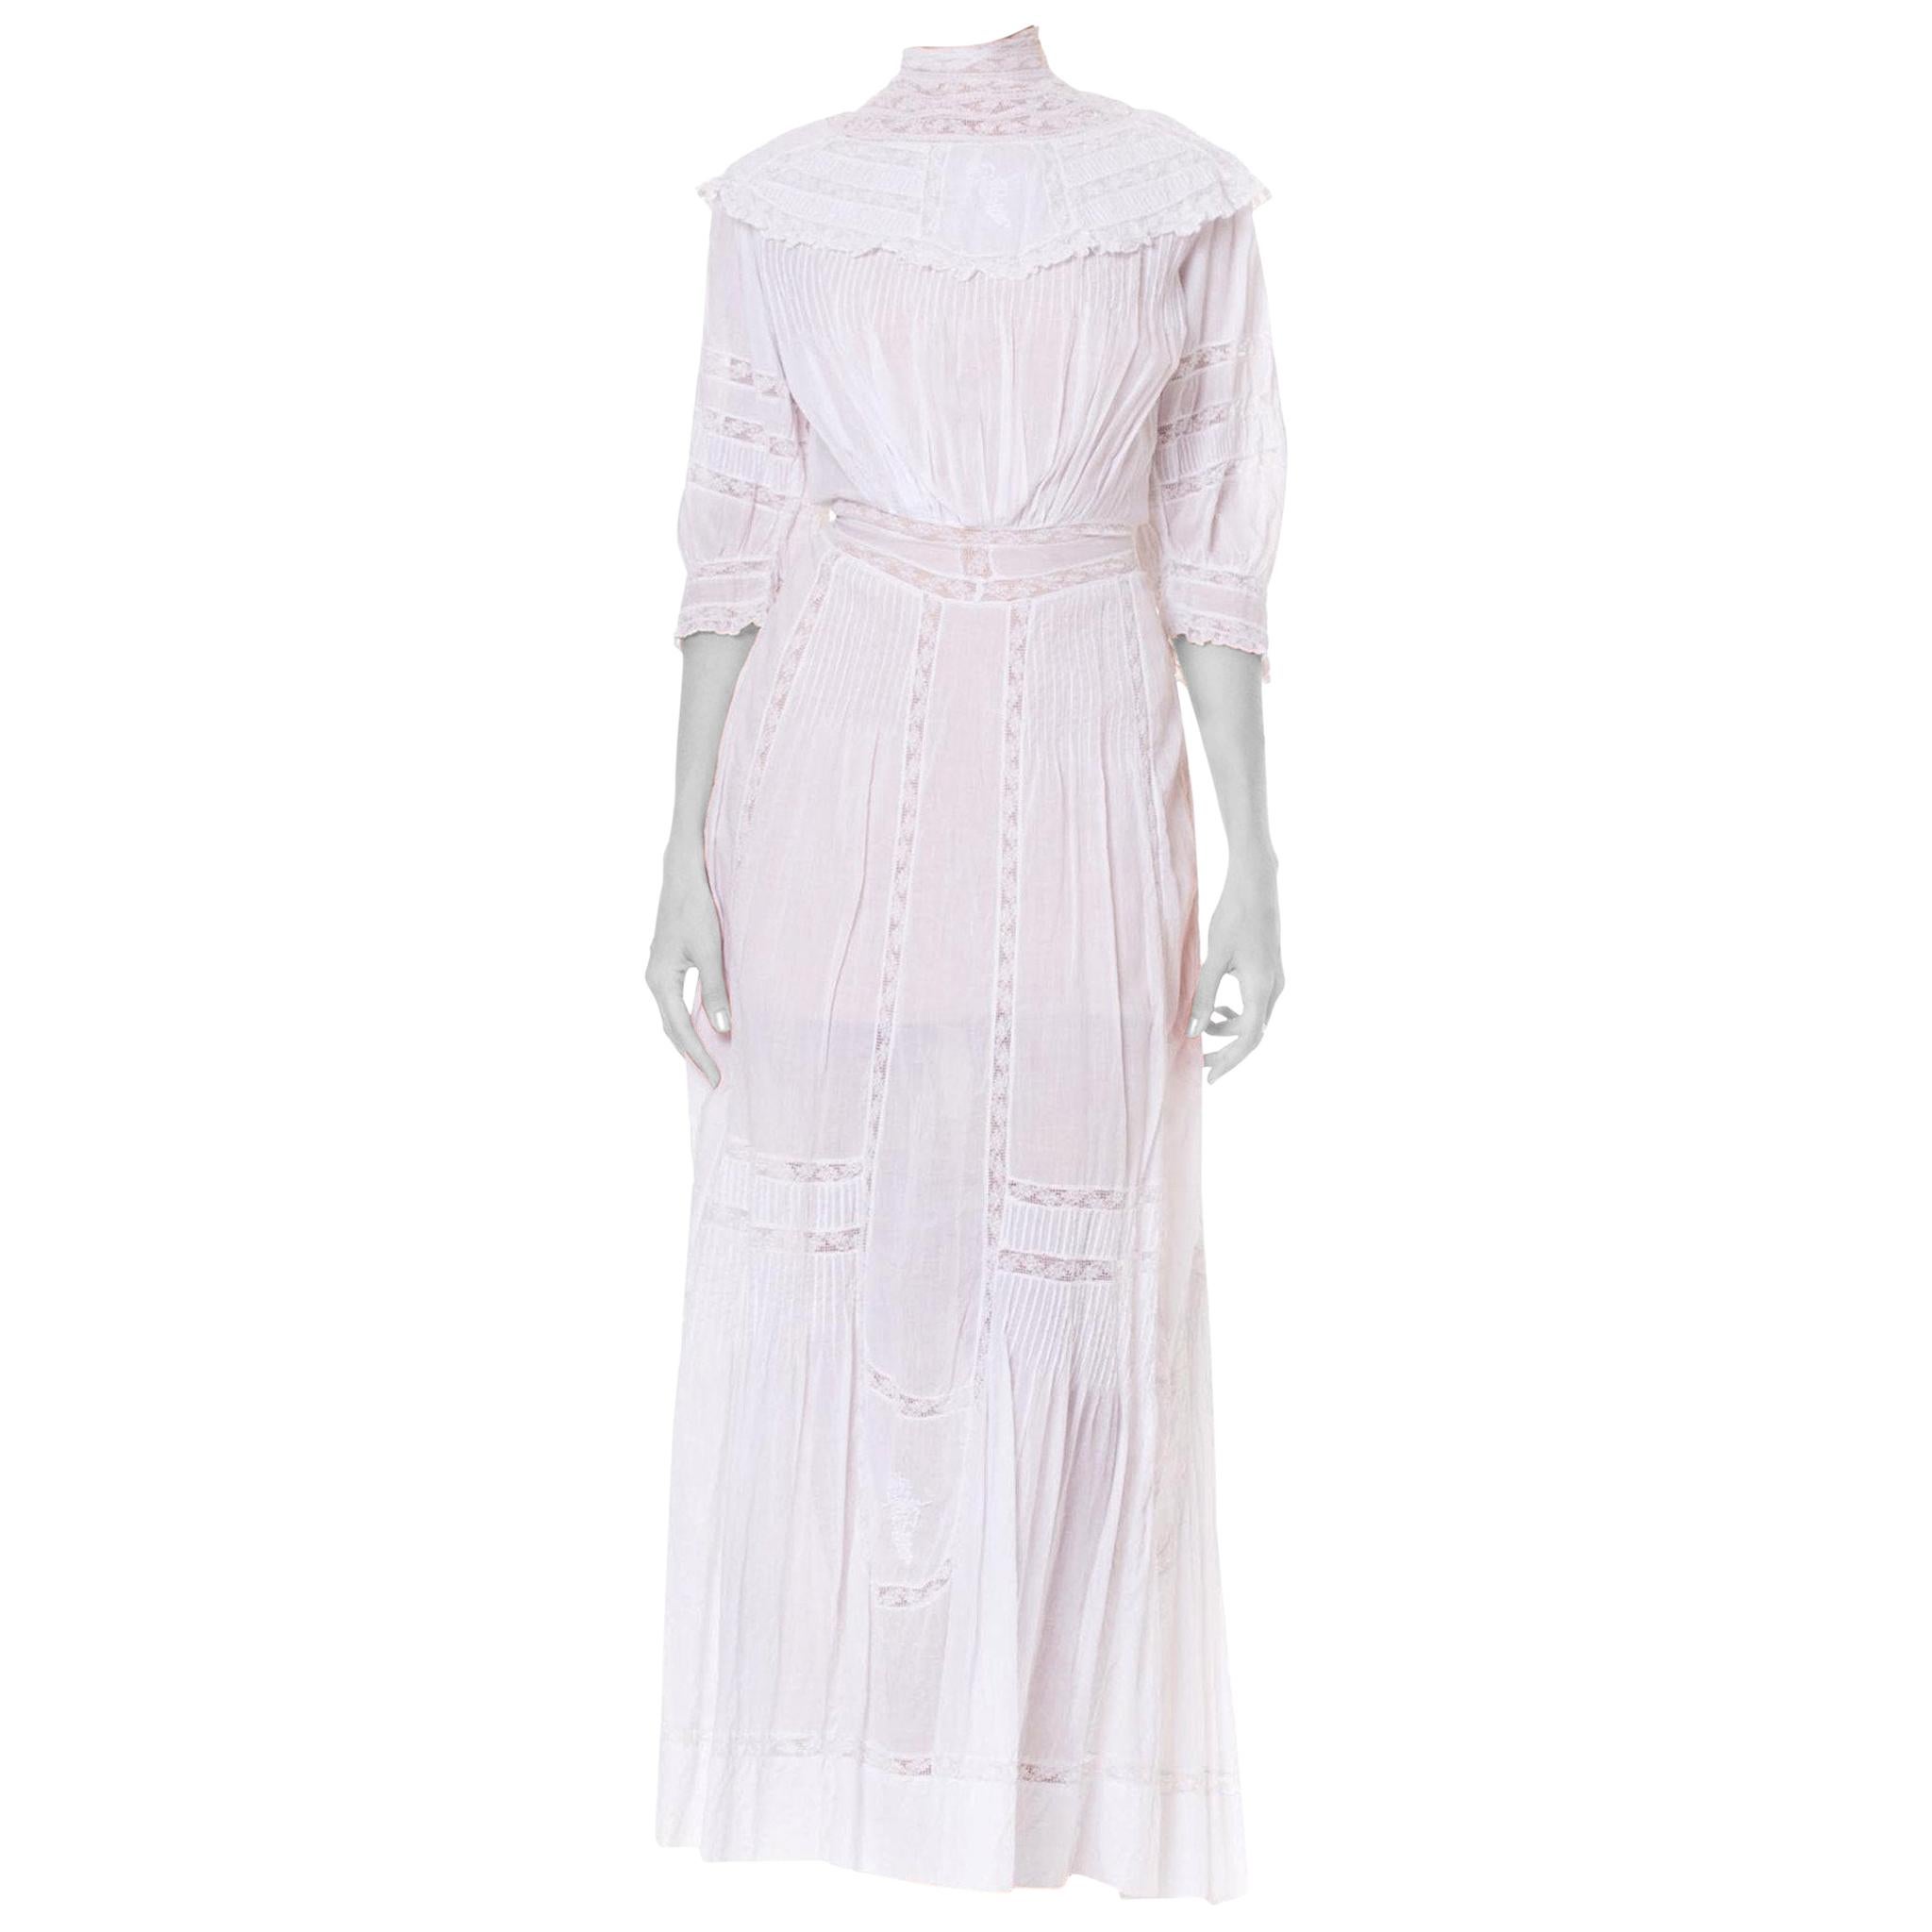 Victorian White Cotton Voile Lace Tea Dress With Half Sleeves For Sale ...